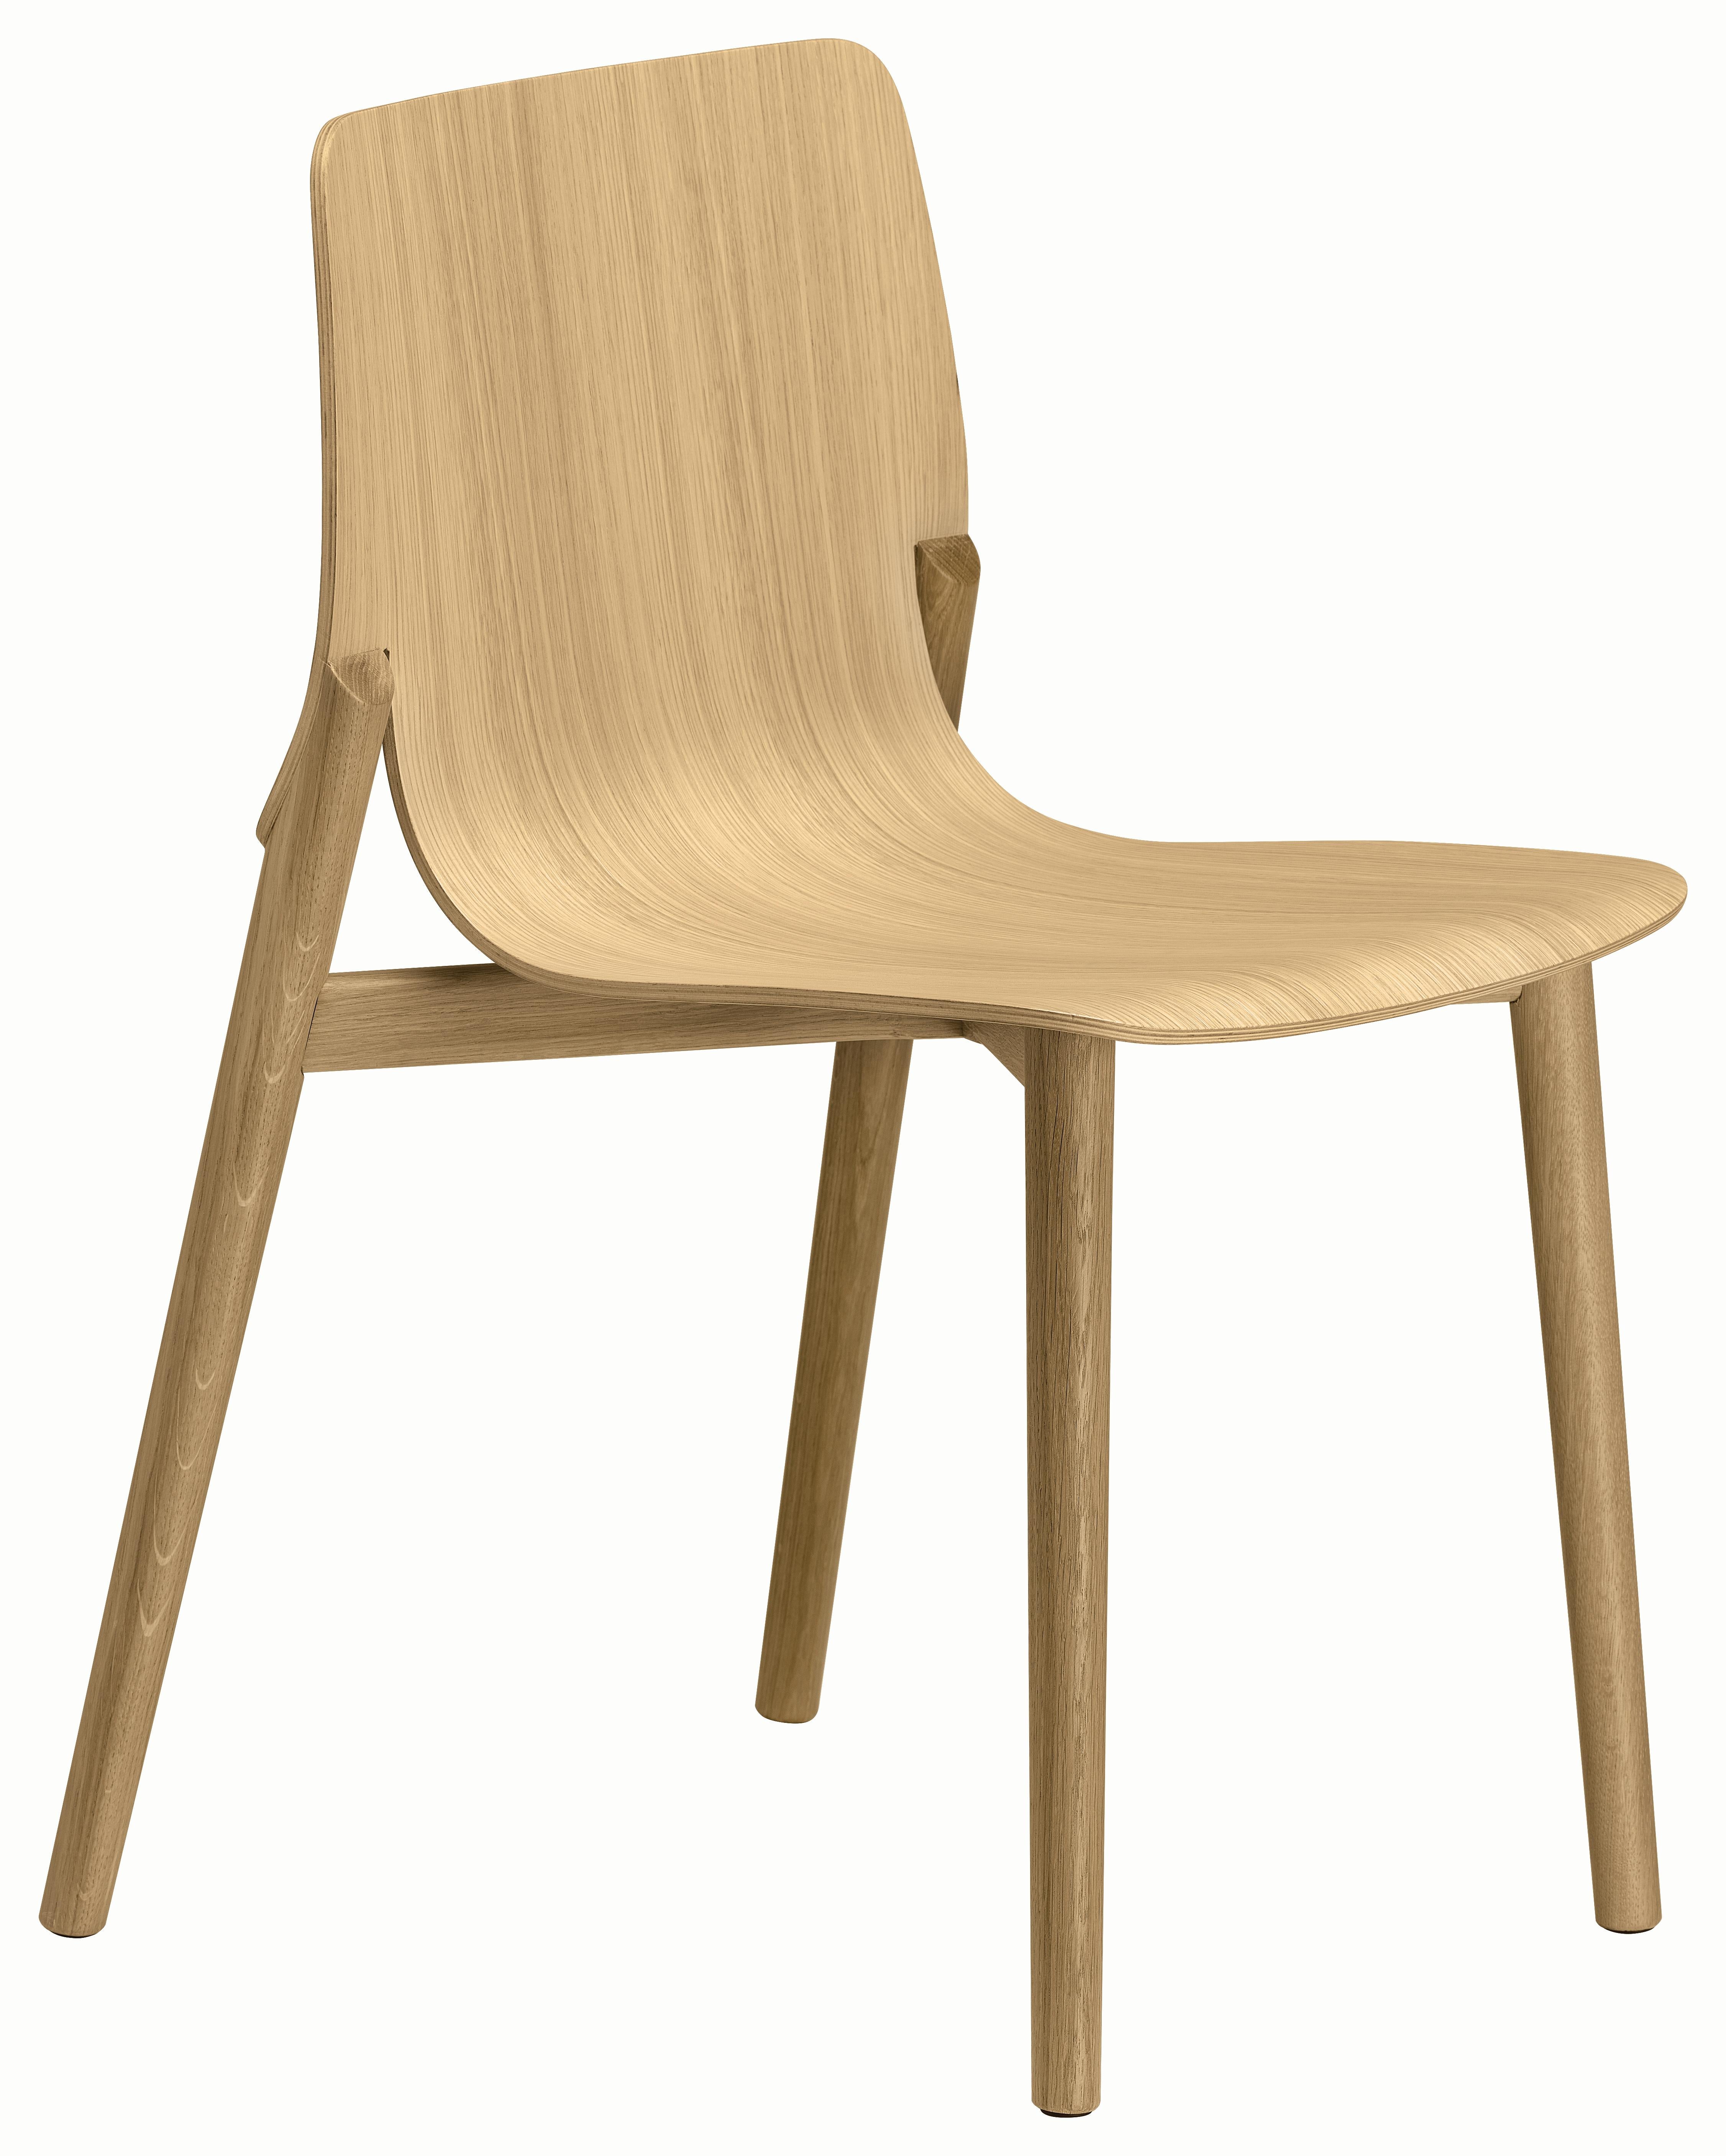 Italian Alias 047 Kayak Chair in Natural Oak Seat and Frame by Patrick Norguet For Sale